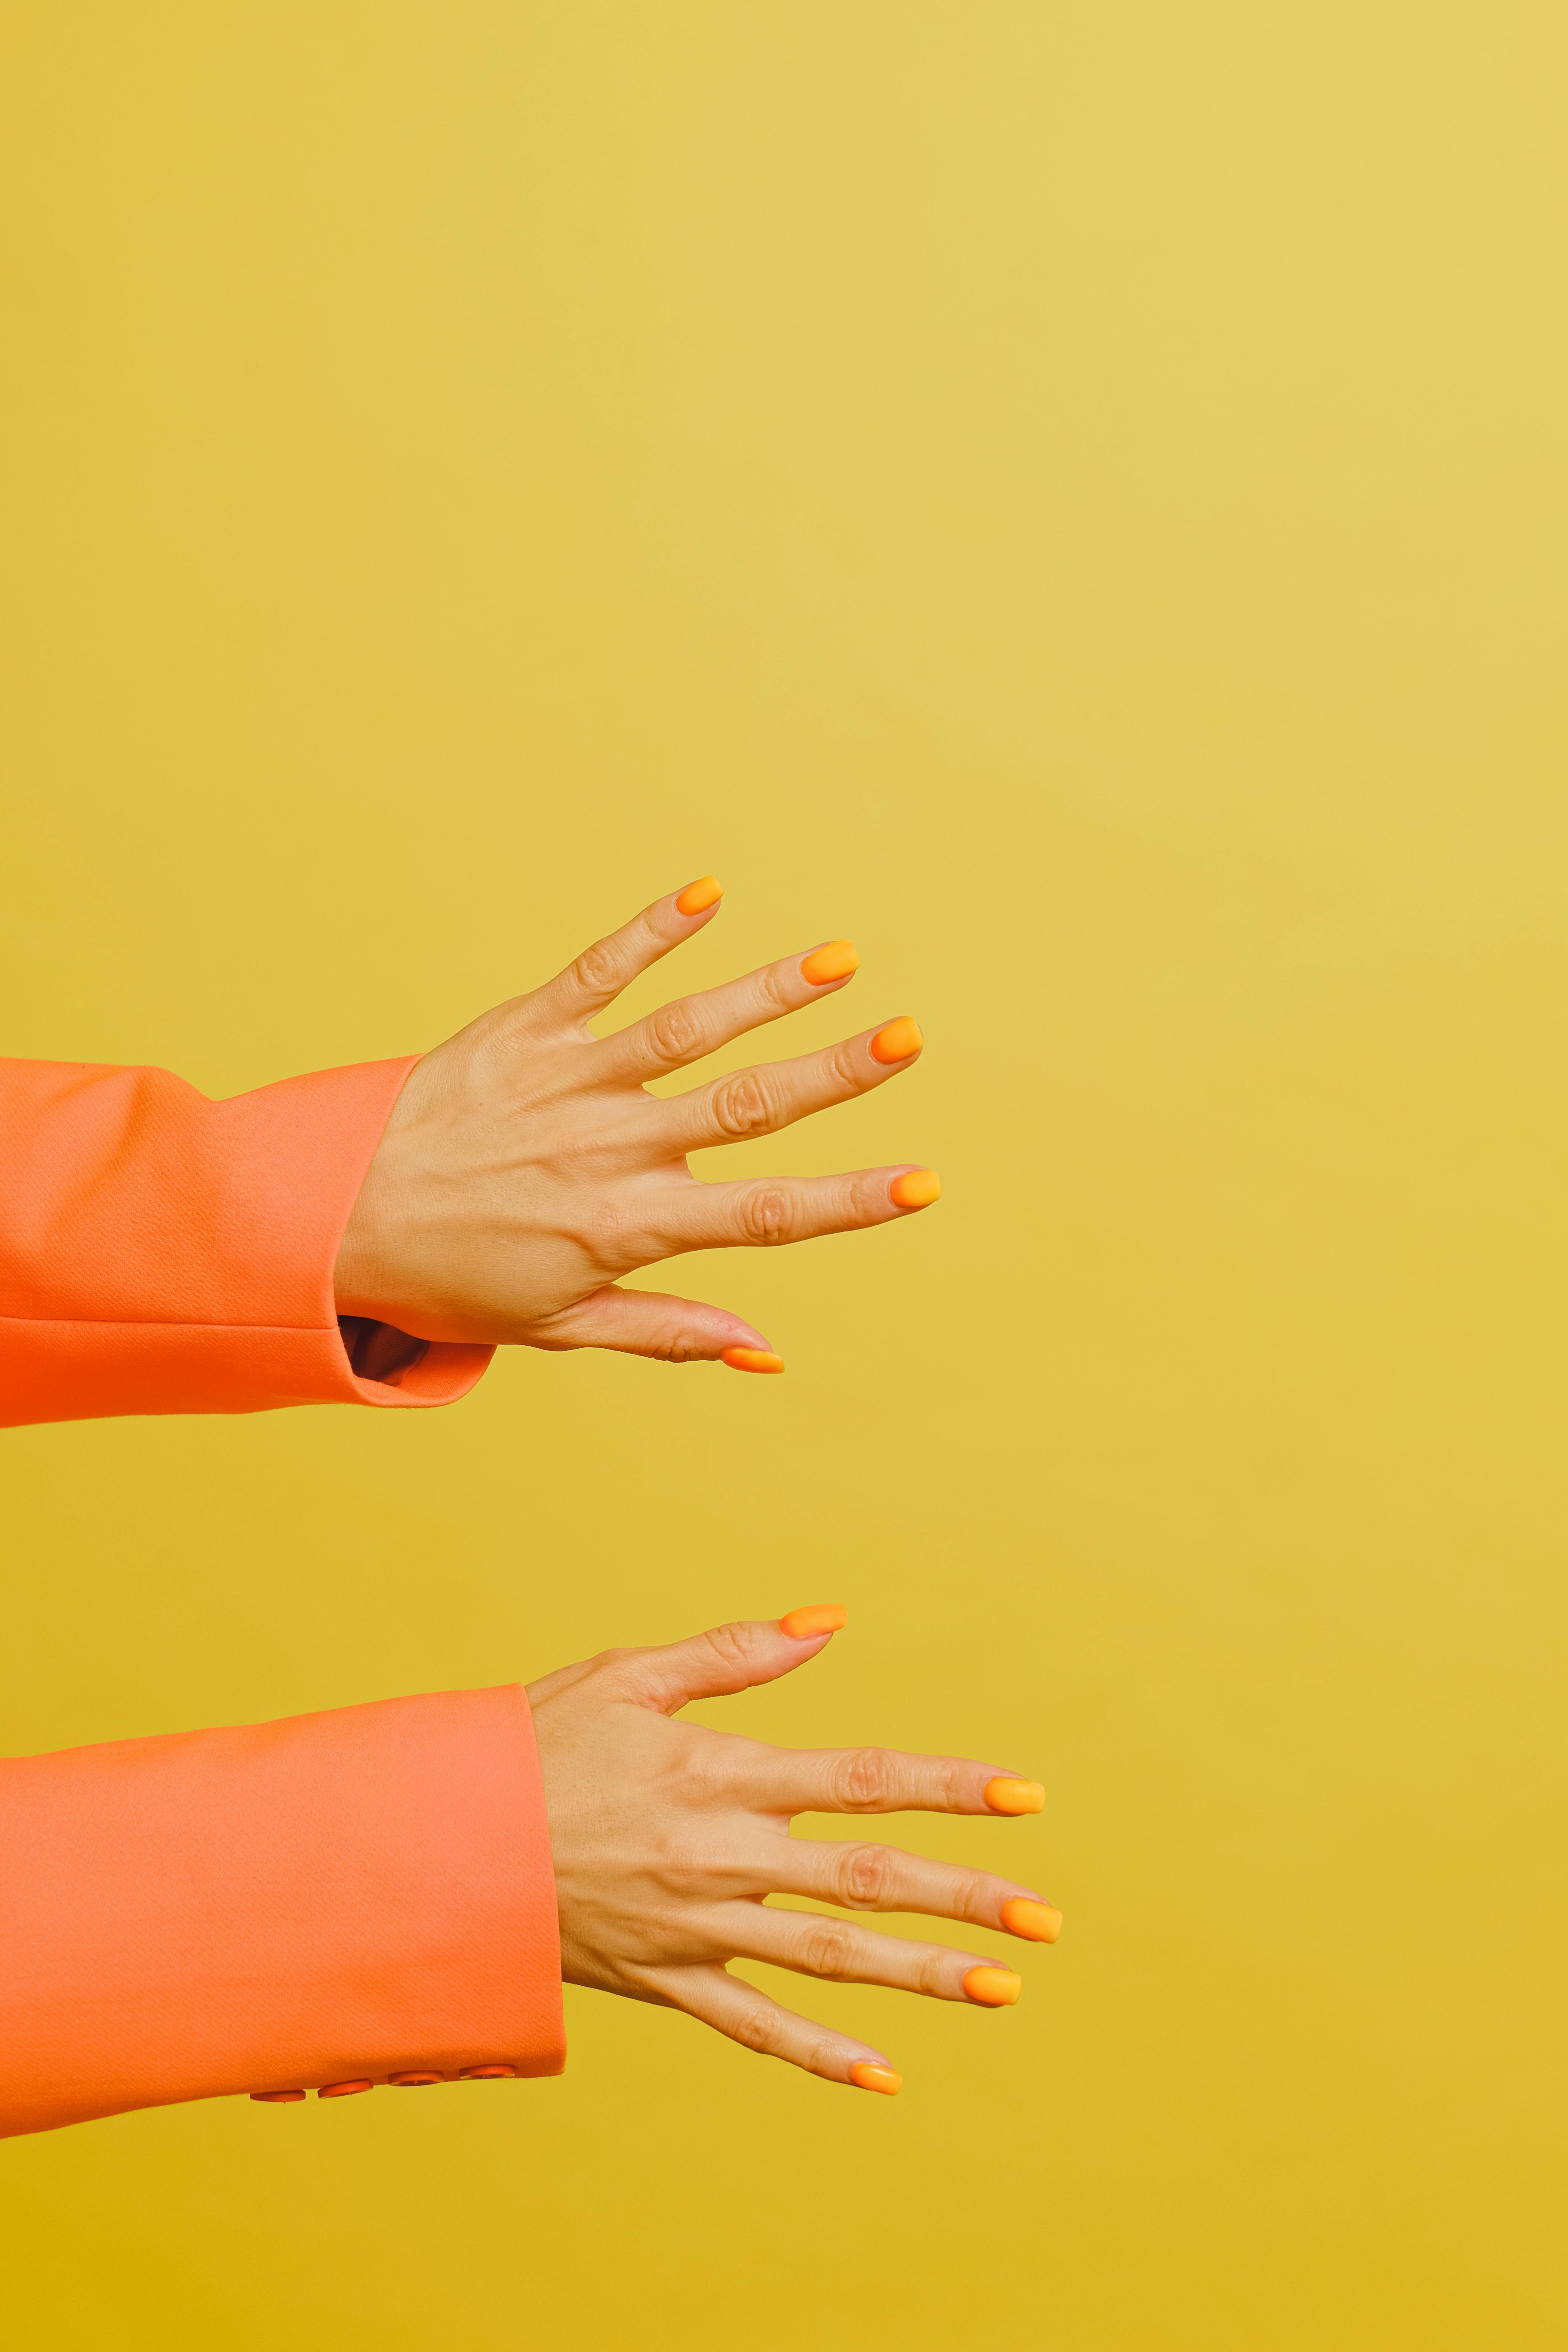 COLORED NAILS | CLOTHES 80 Photos & Videos Collected by Anna Shvets